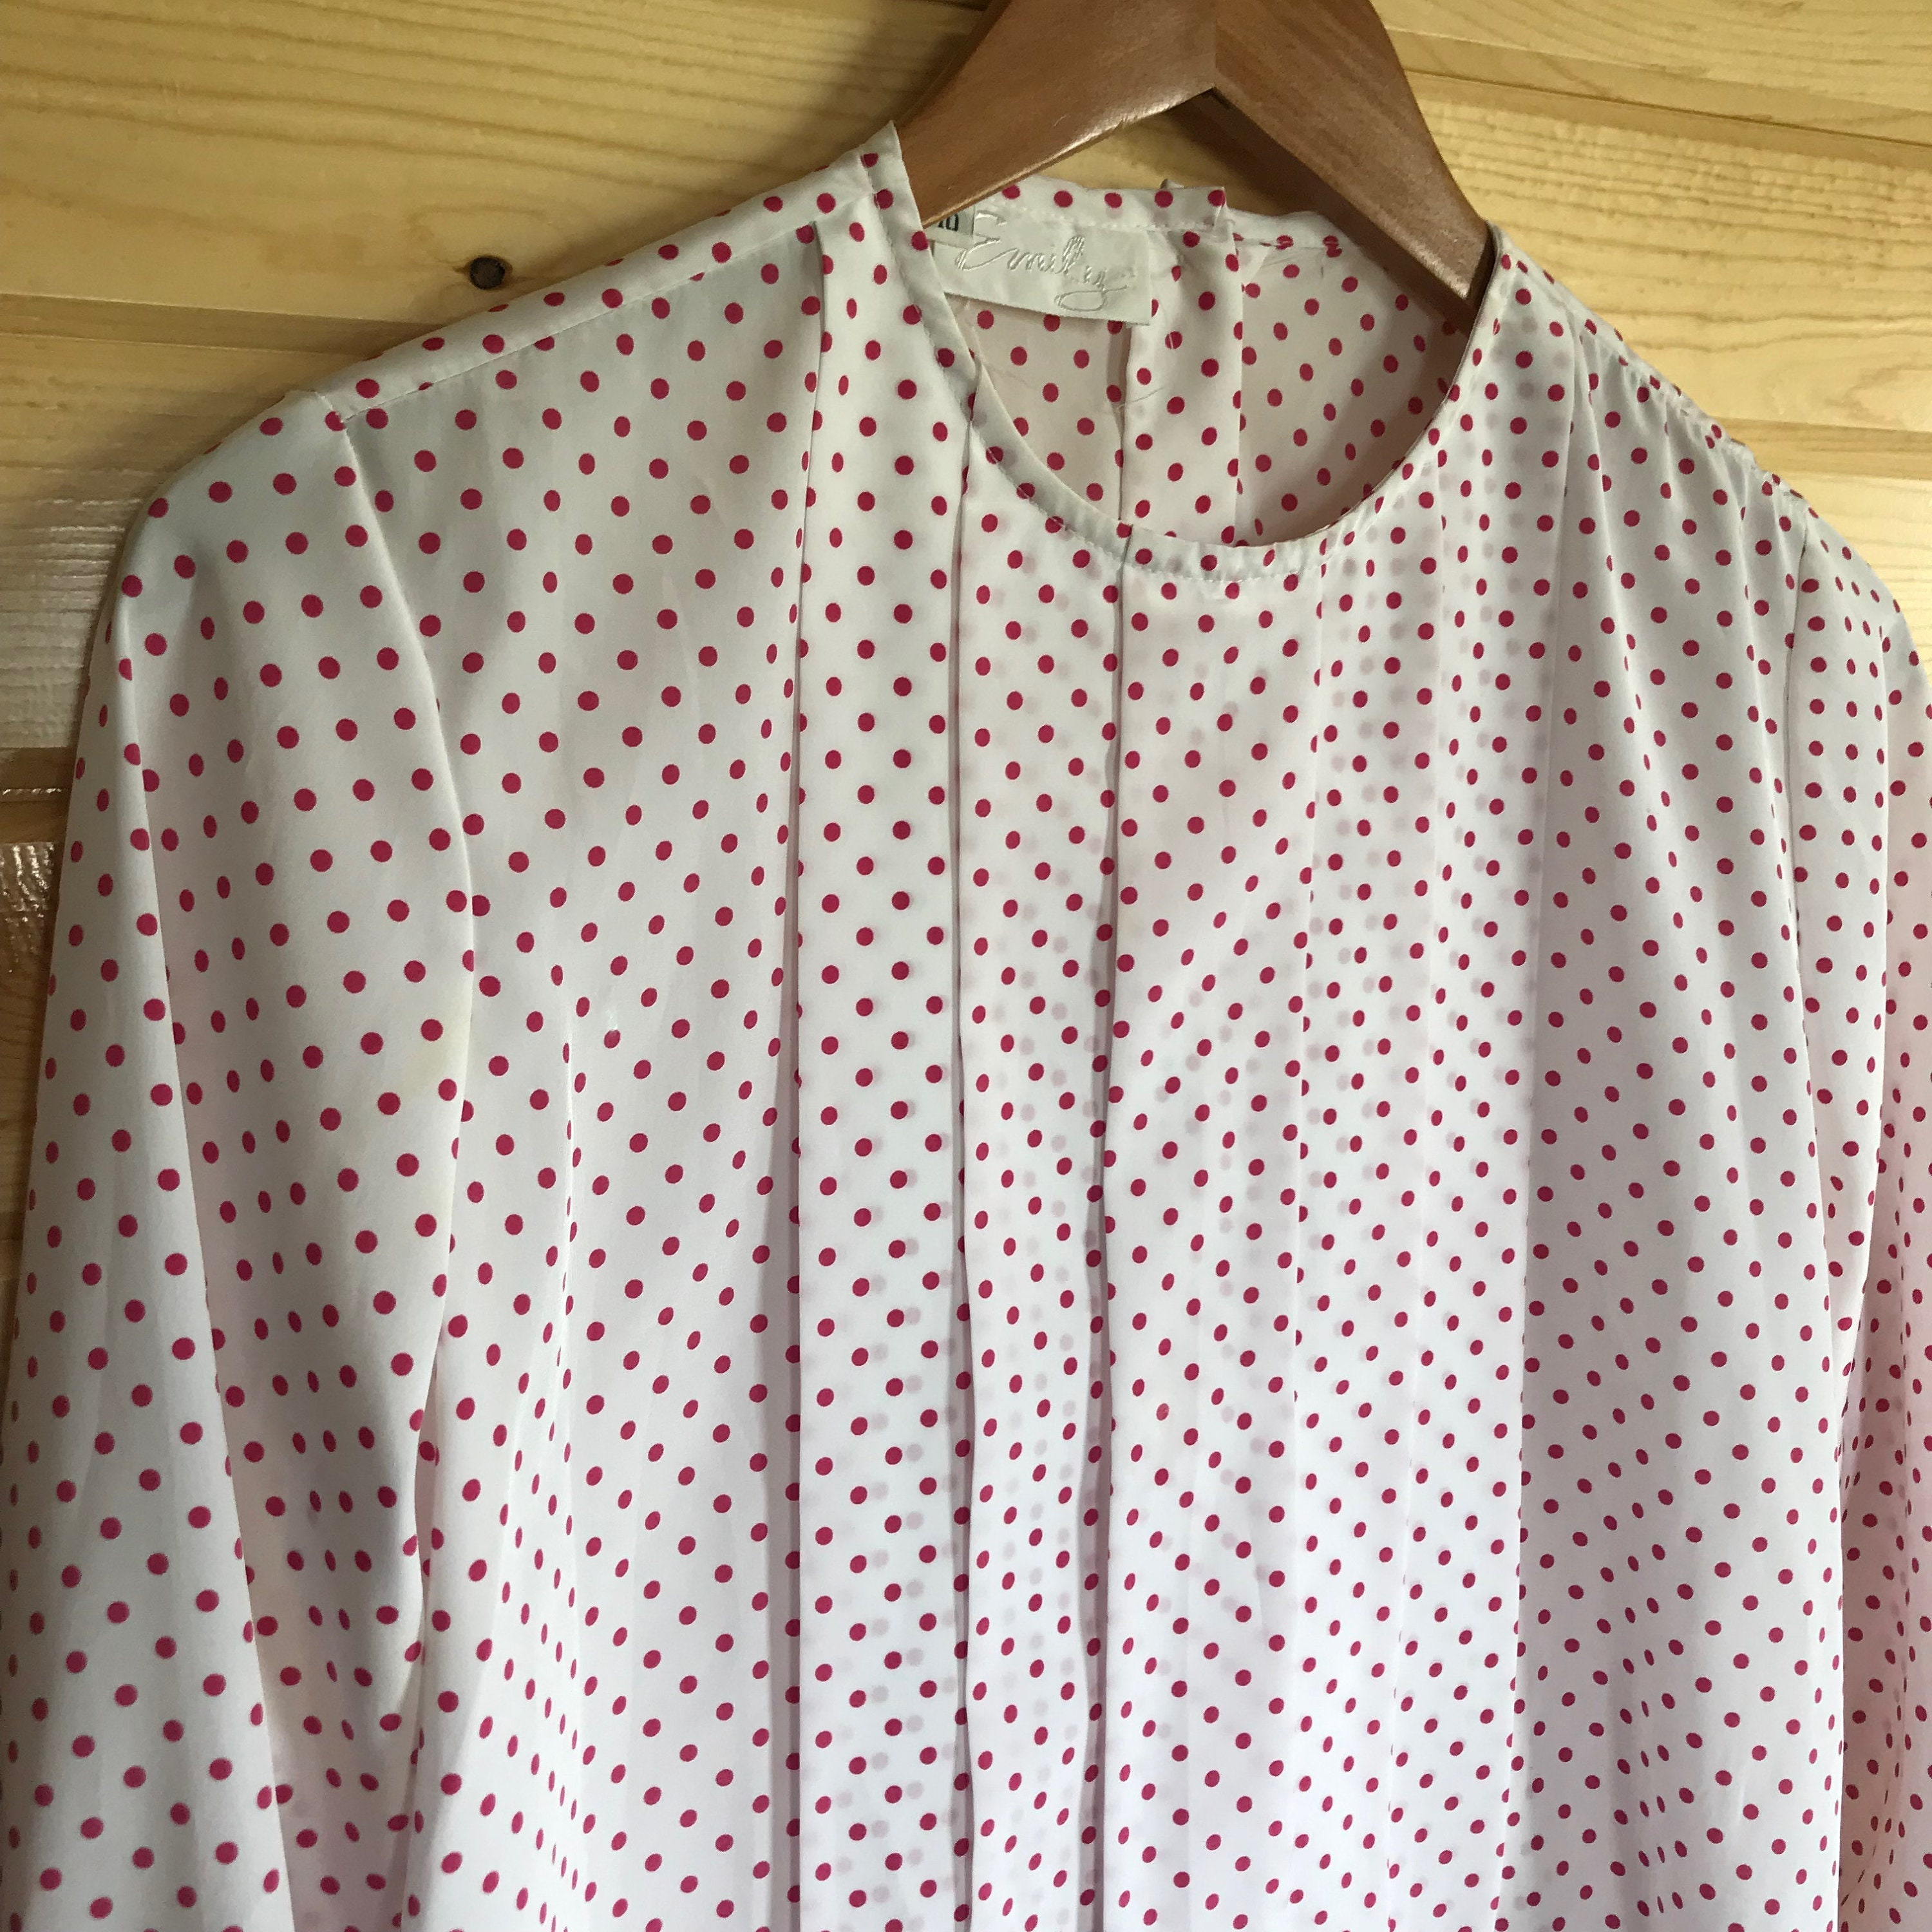 Vintage 70s White With Red Polka Dot Blouse | Etsy